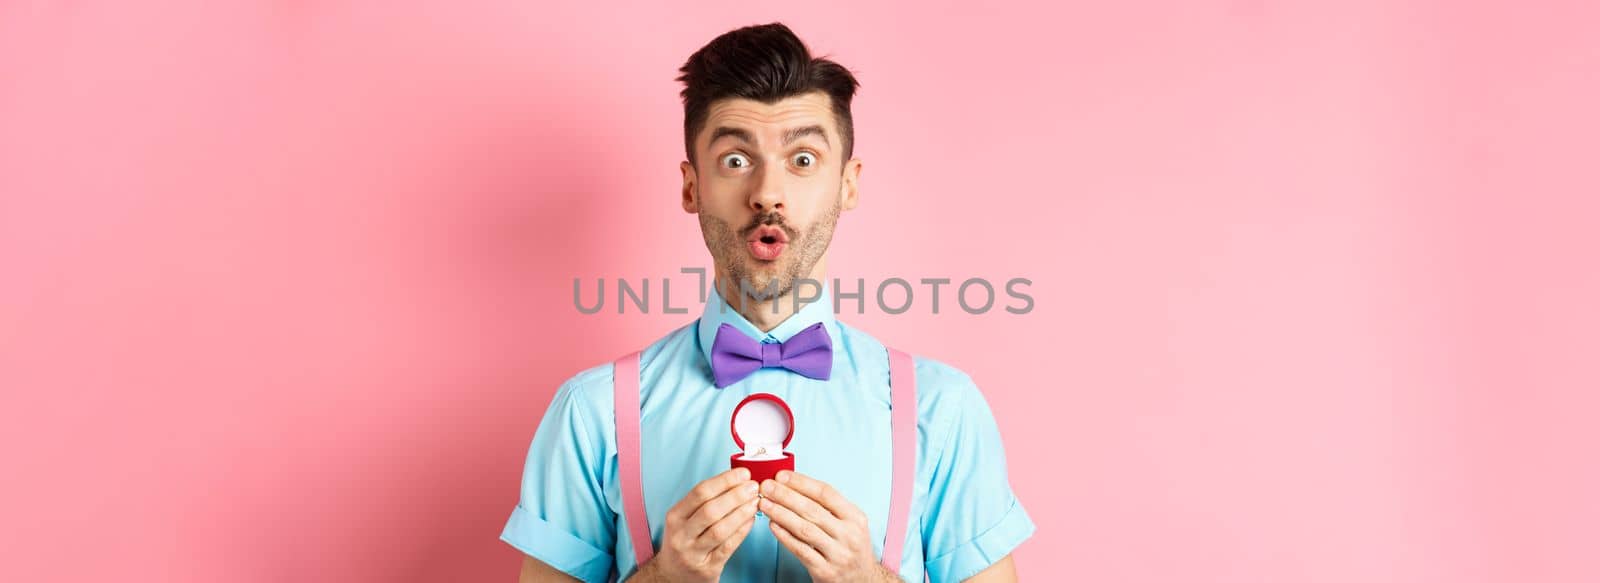 Valentines day. Funny man with moustache and bow-tie, looking excited and showing engagement ring, asking girlfriend to marry him, standing over pink background.